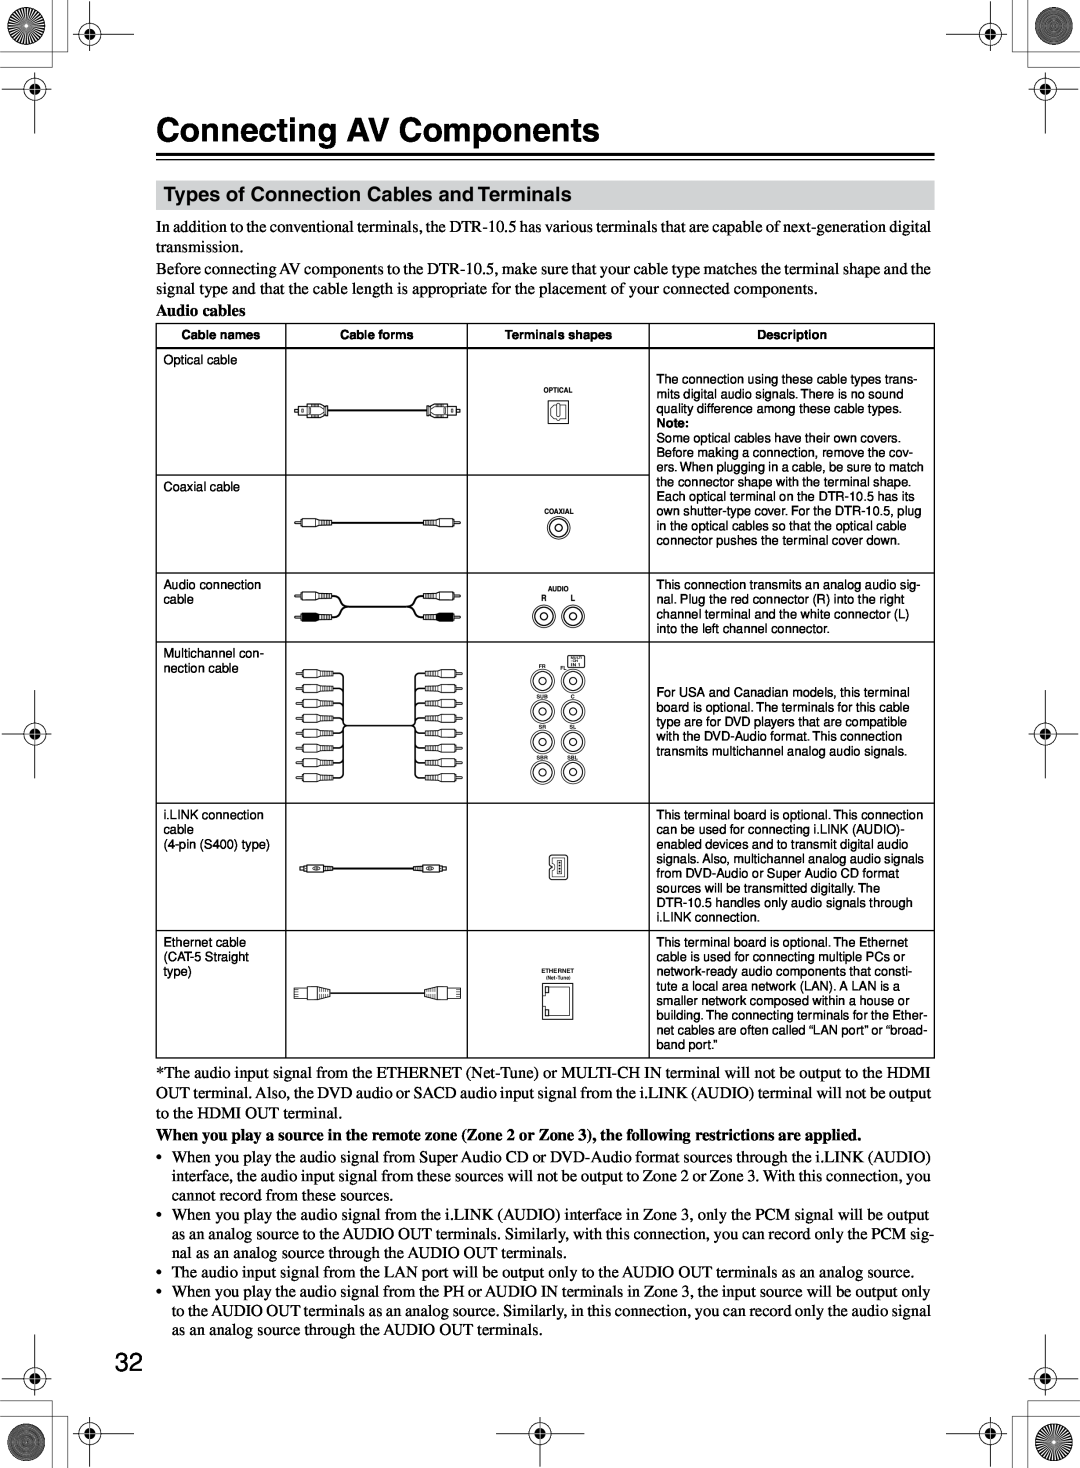 Integra DTR-10.5 instruction manual Connecting AV Components, Types of Connection Cables and Terminals, Audio cables 